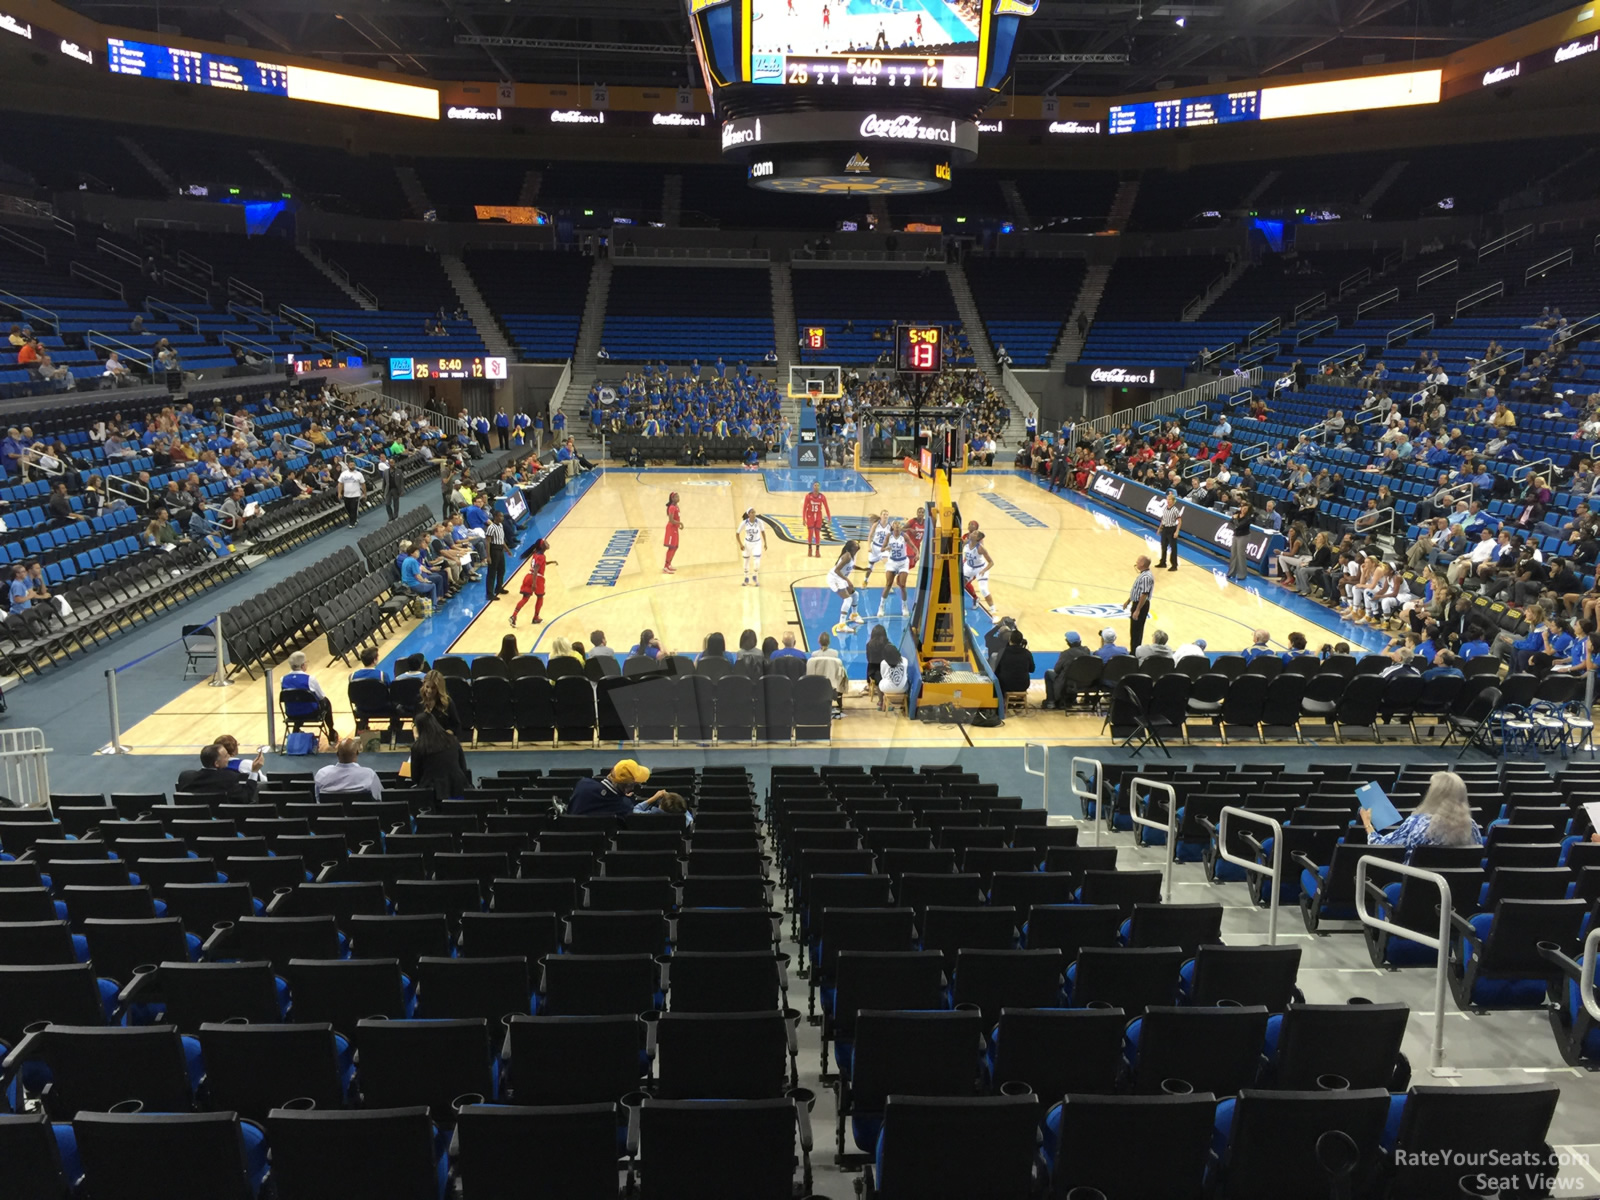 section 109, row 3 seat view  - pauley pavilion